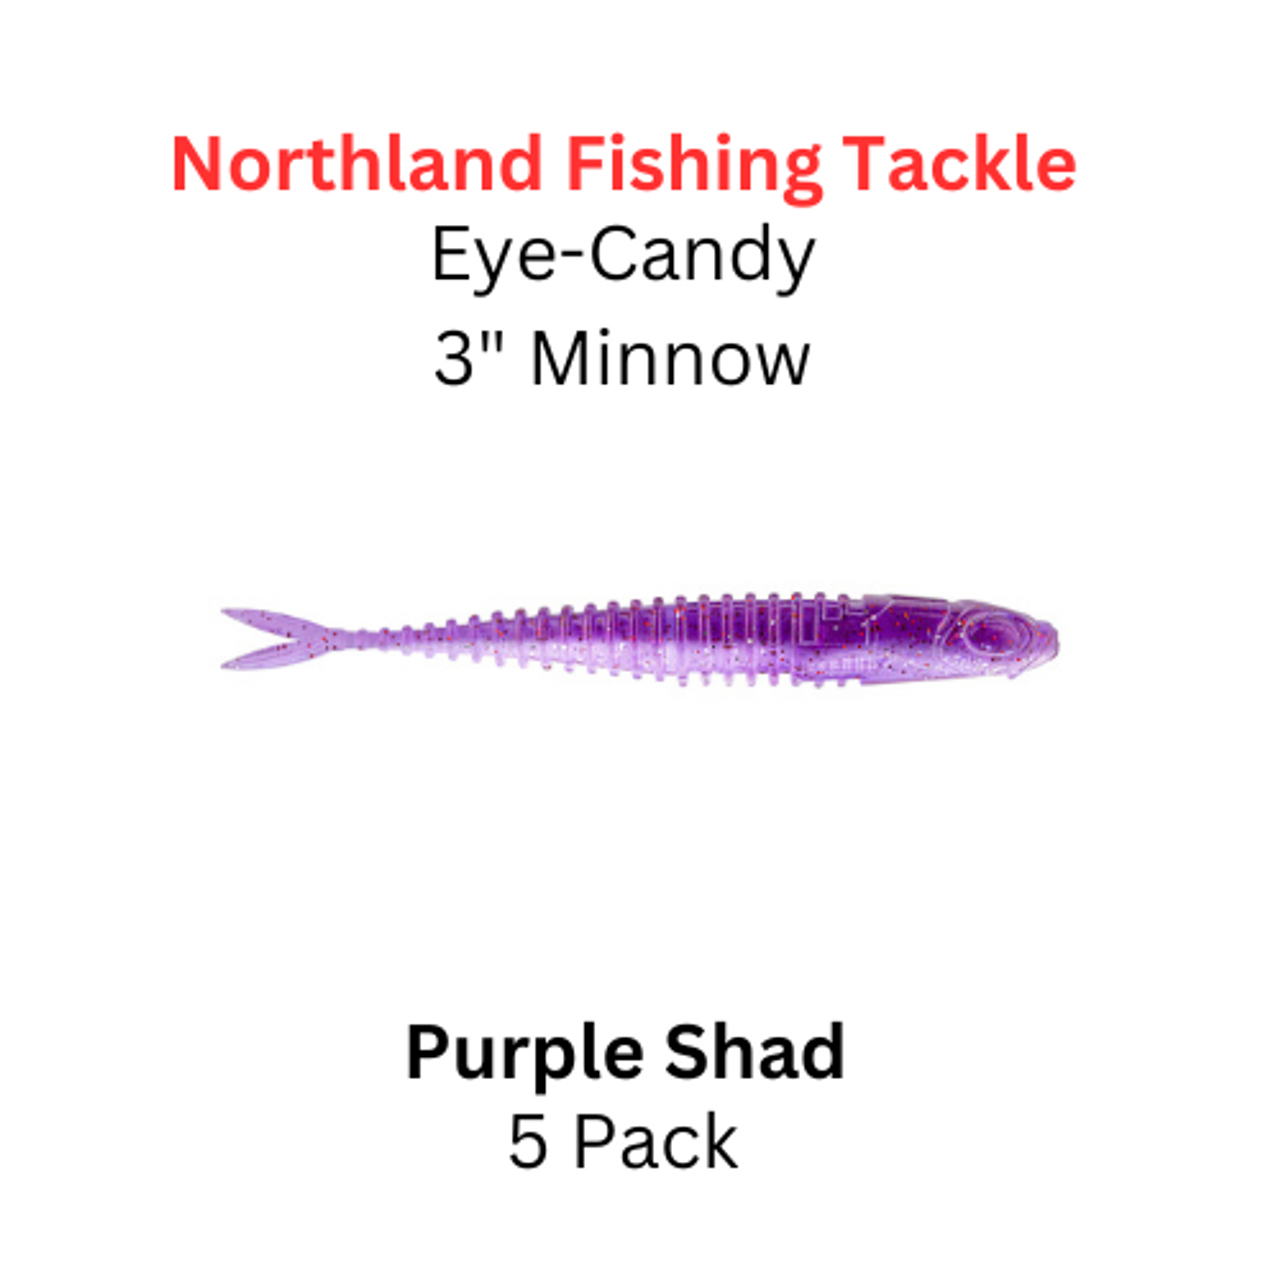 https://cdn11.bigcommerce.com/s-u9nbd/images/stencil/1280x1280/products/6685/16906/Northland_Fishing_Tackle_Eye_Candty_3_Minnow_Purple_Shad___40201.1688769178.png?c=2